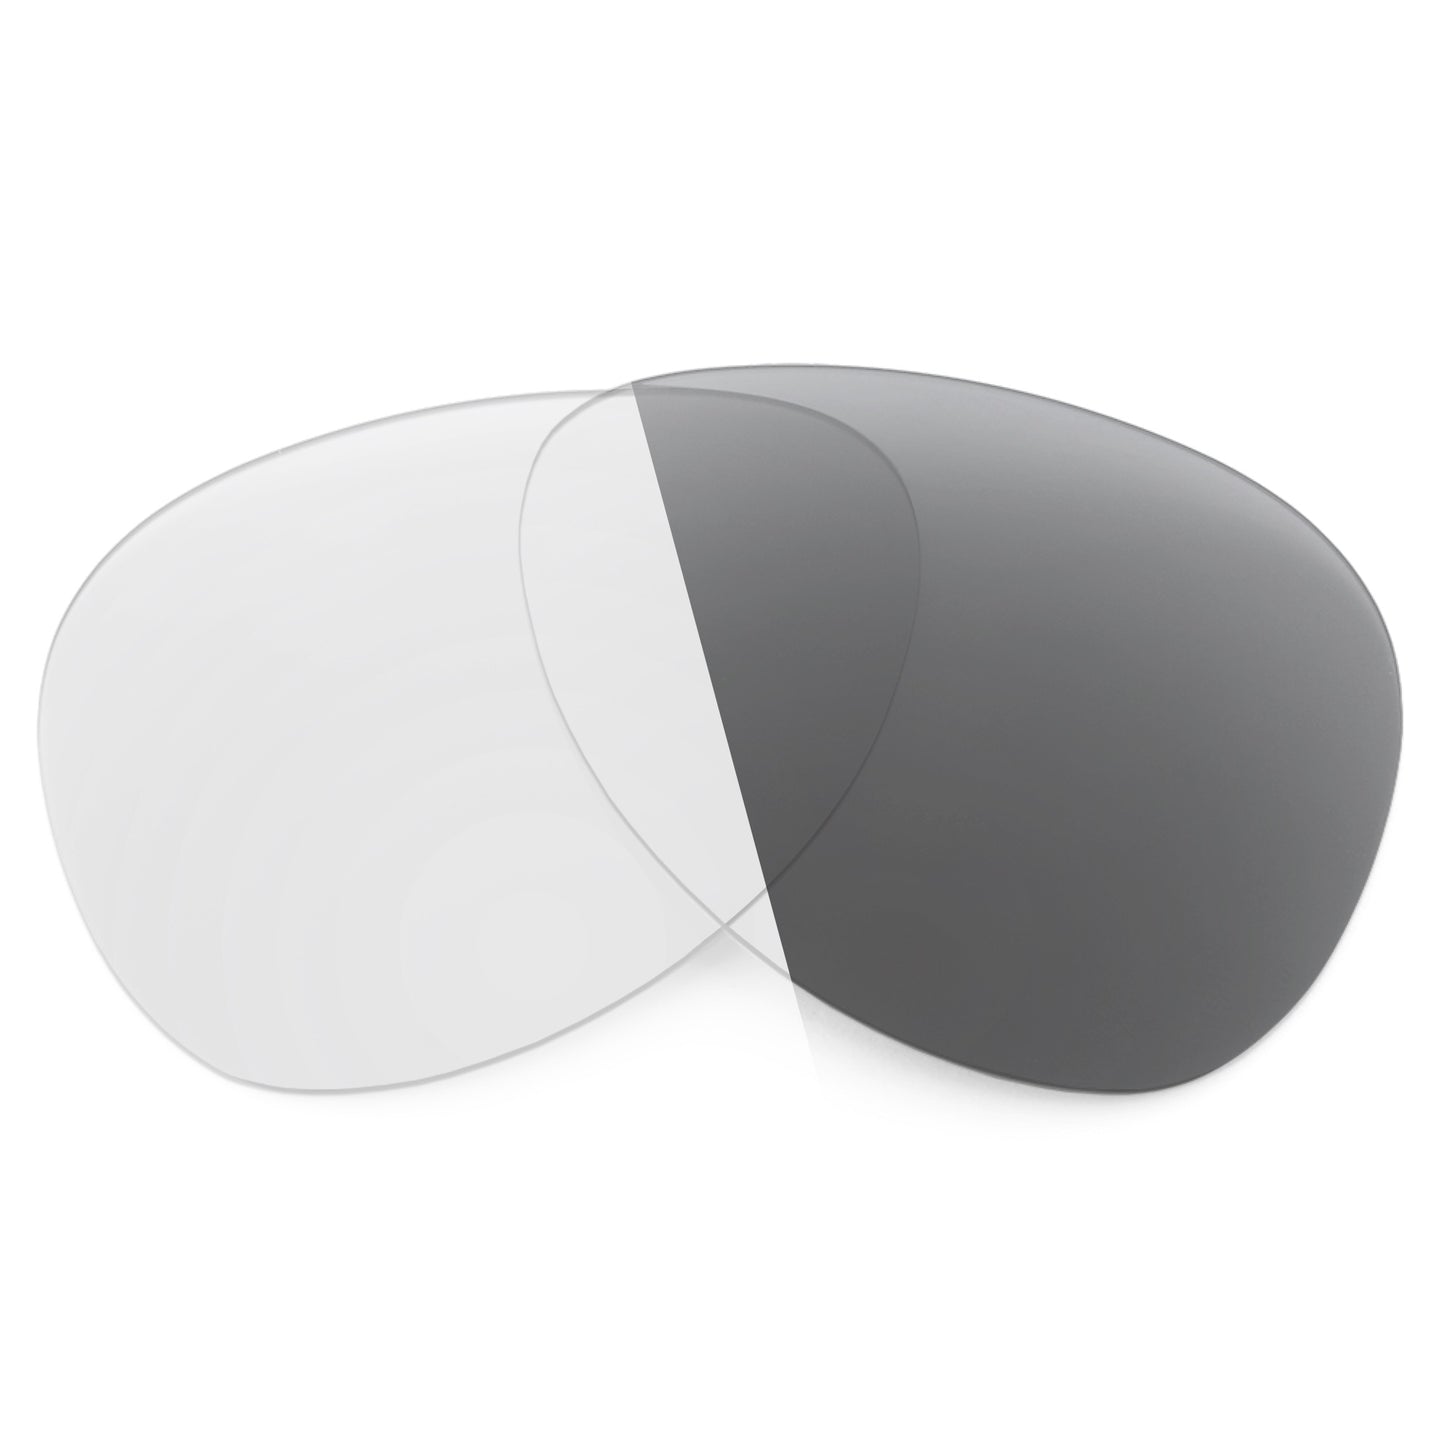 Revant replacement lenses for Ray-Ban Cats 5000 RB4125 59mm Non-Polarized Adapt Gray Photochromic